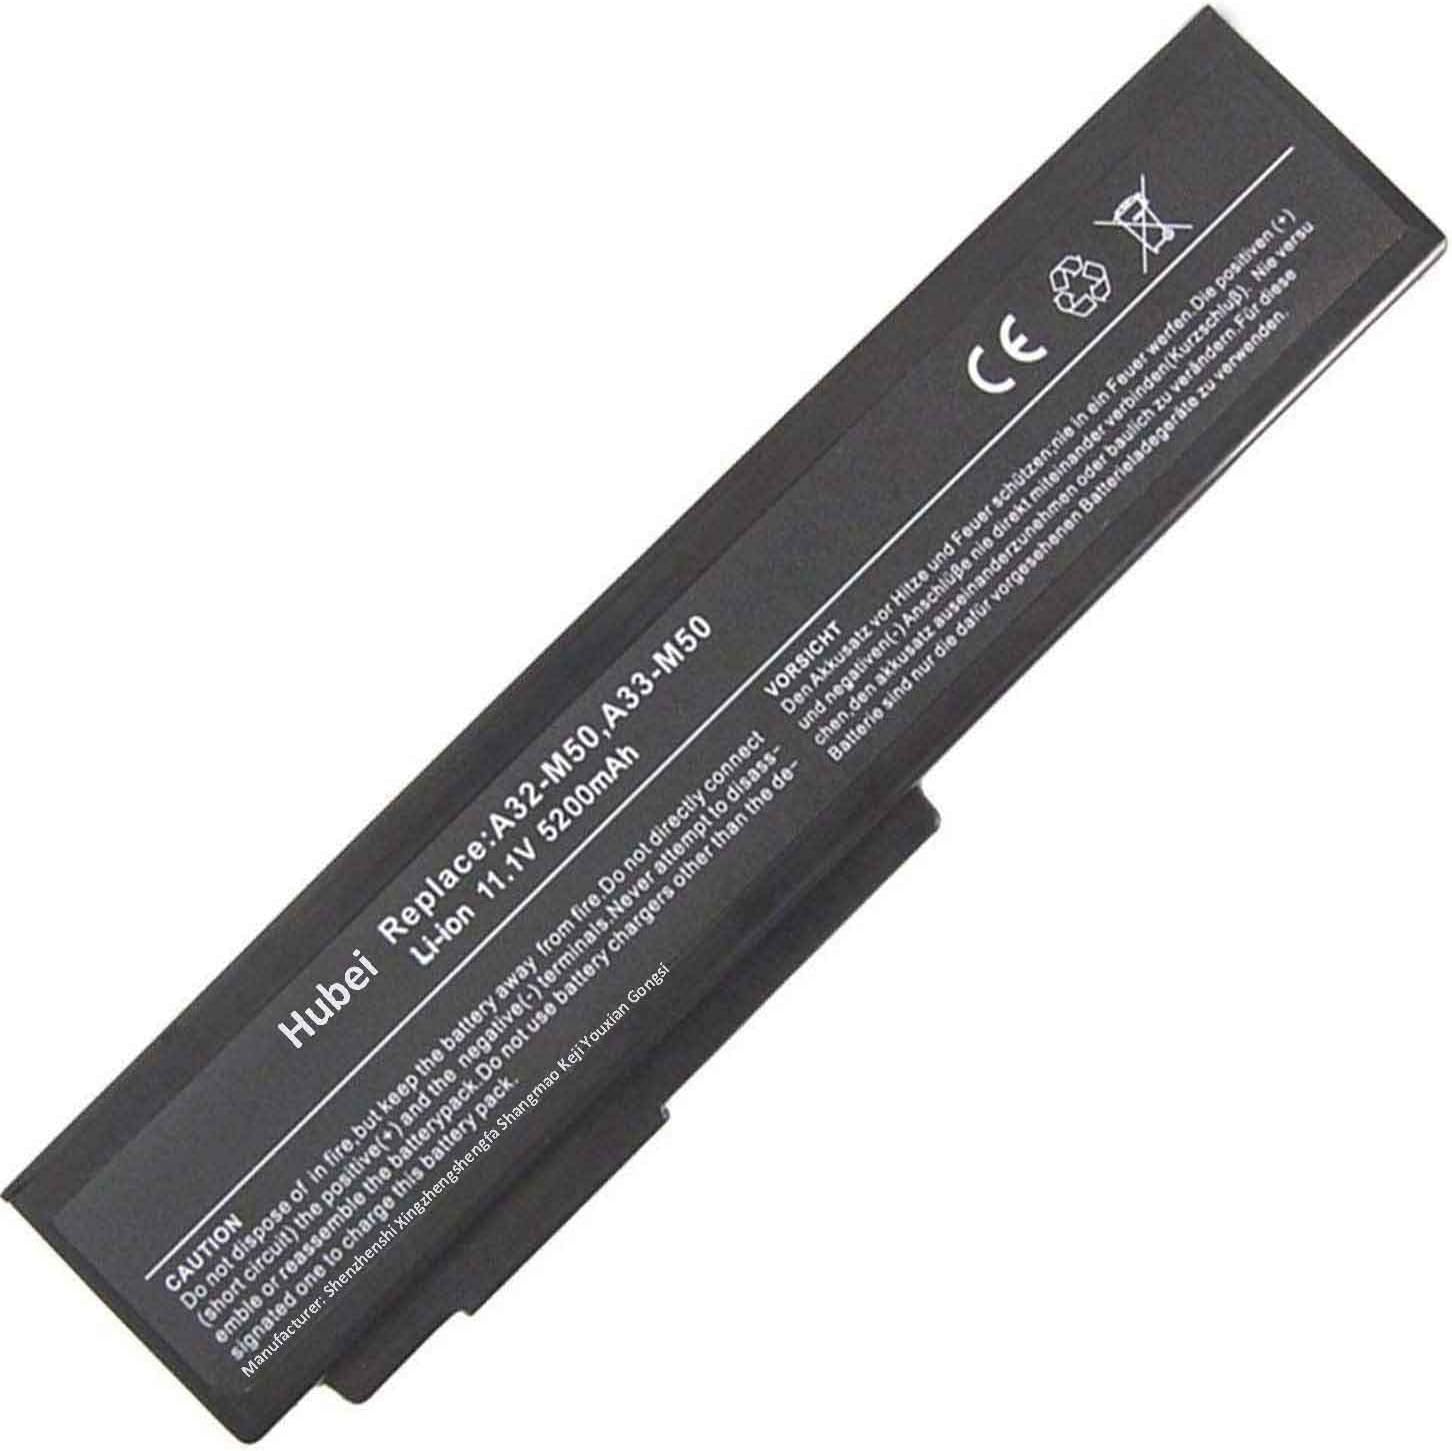 A32-N61 A32-M50 A33-M50 Laptop Battery Replacement for Asus N53SV N53S G50VT G51VX M50 N53 N53J N53JQ N53SN N61J N61JQ N61JV A32-N61 A32-M50 G50 G60 G51J L062066 M60